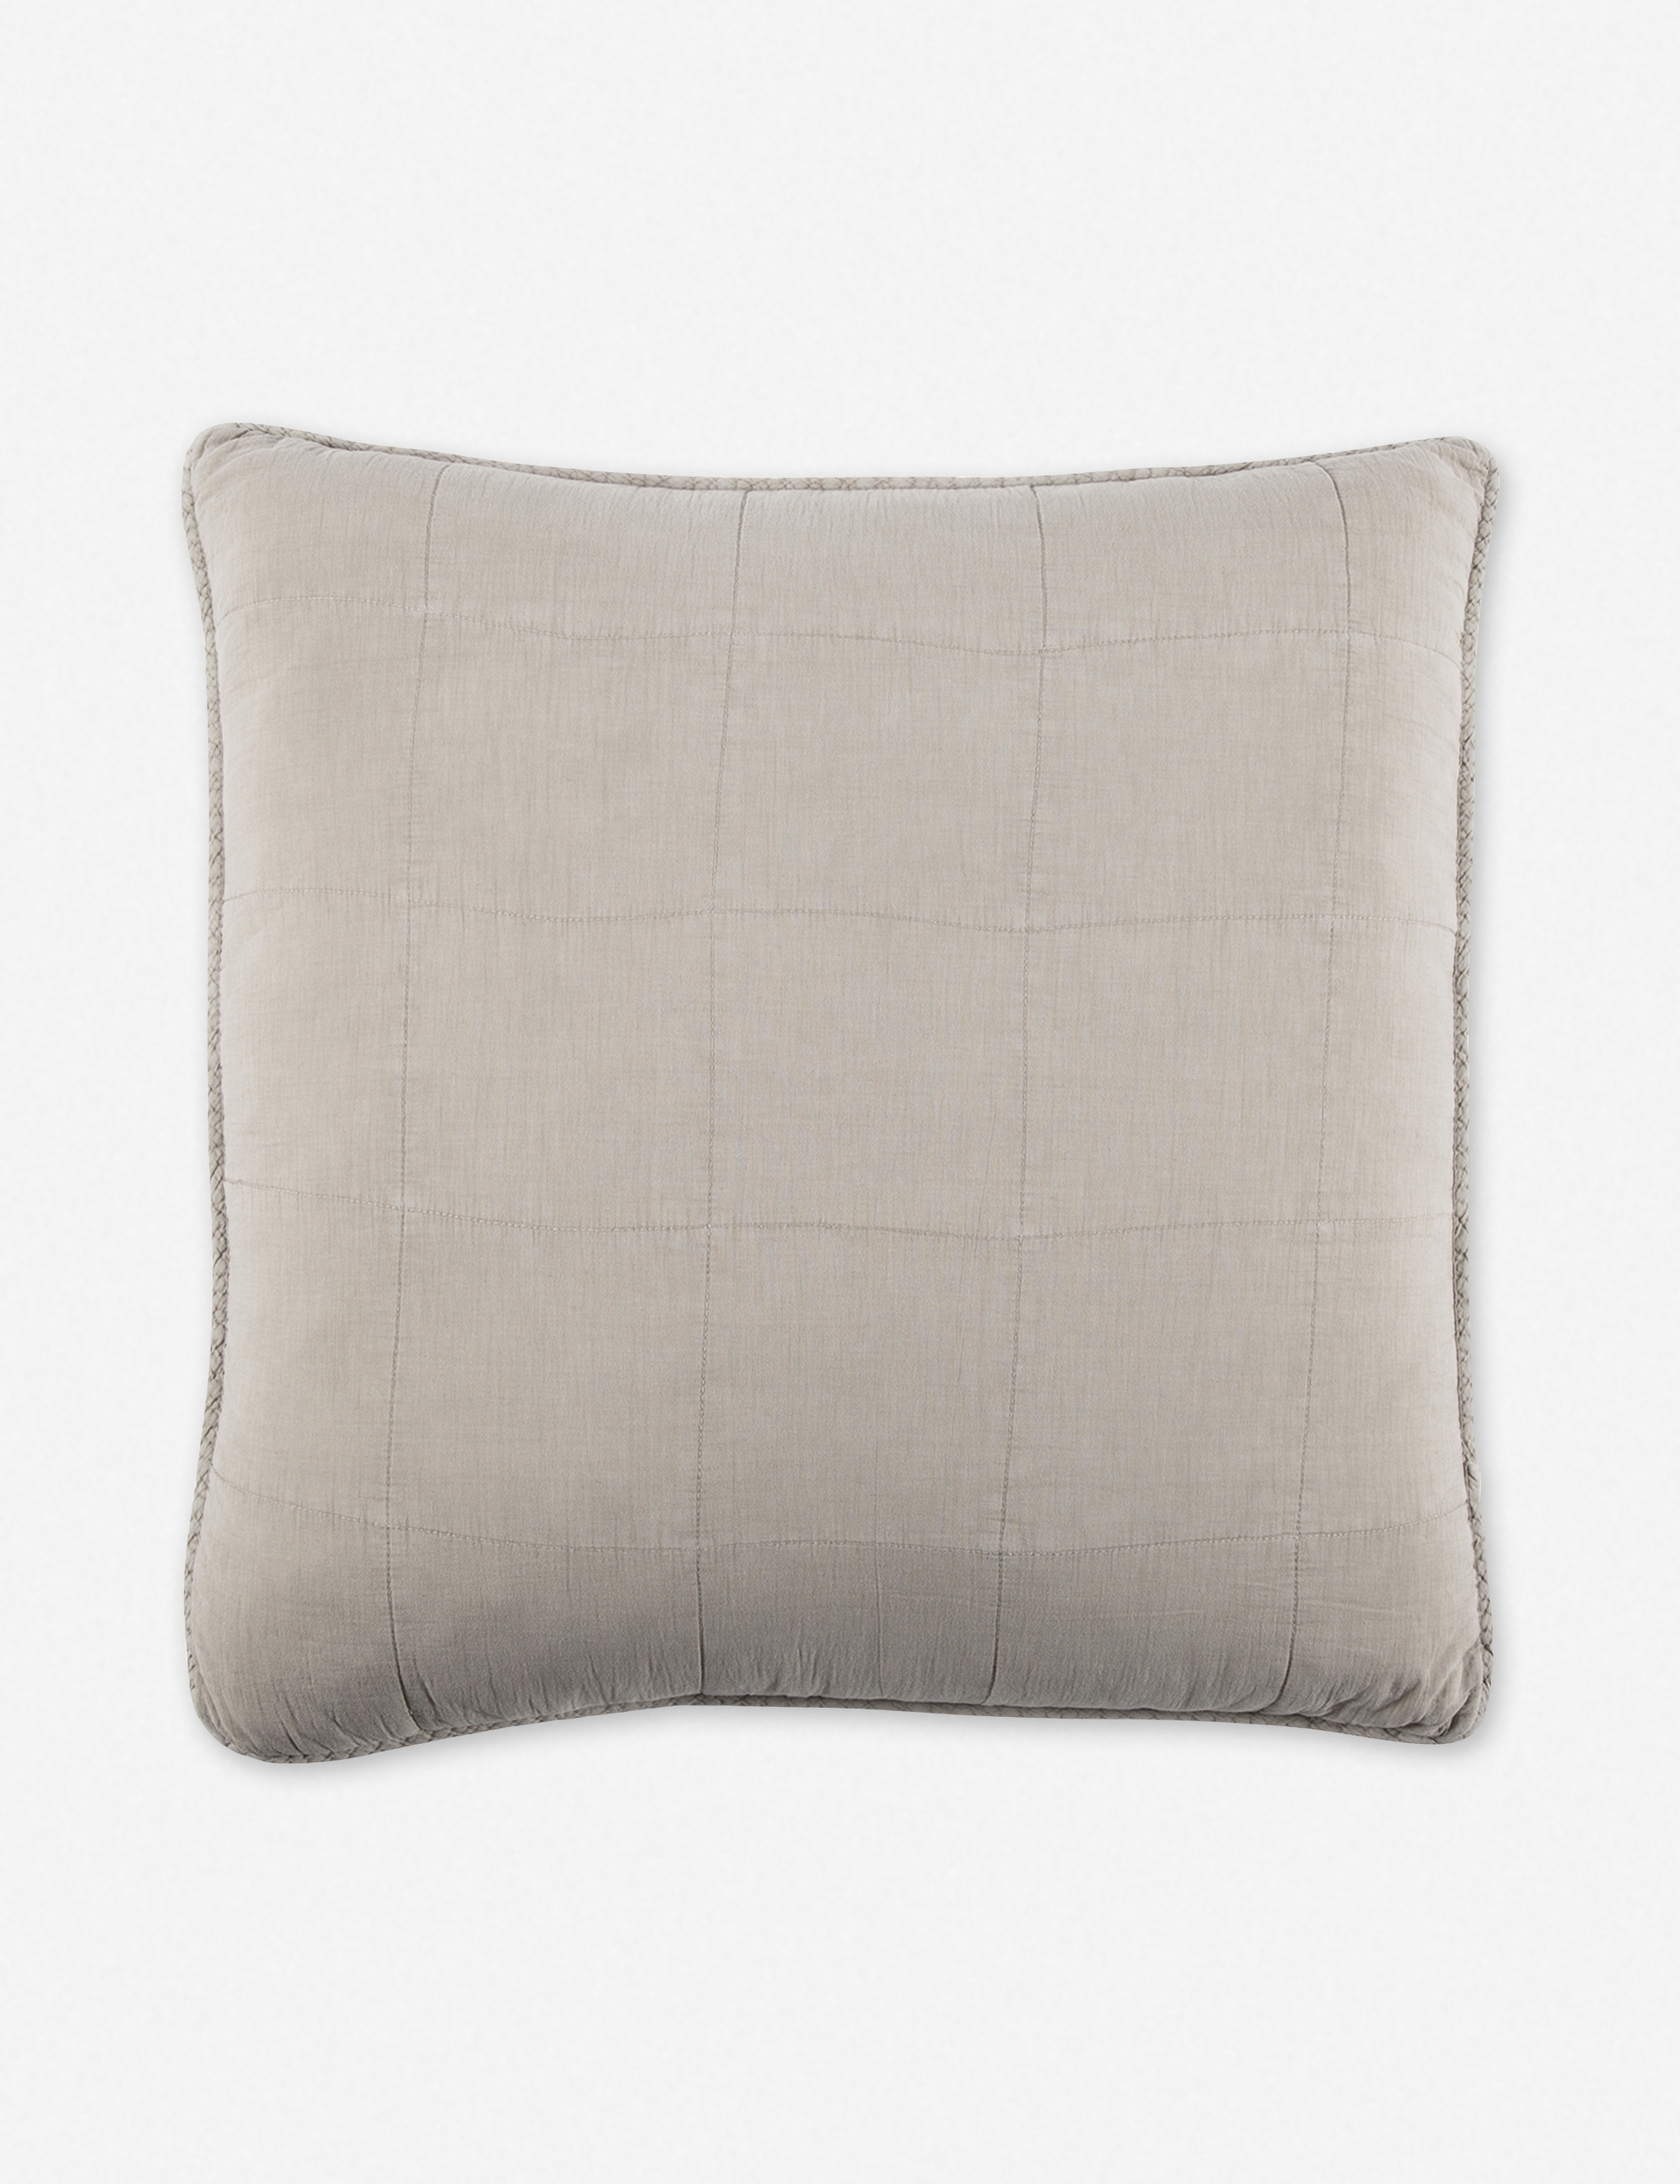 Antwerp Large Quilted Euro Sham by Pom Pom at Home - Image 0